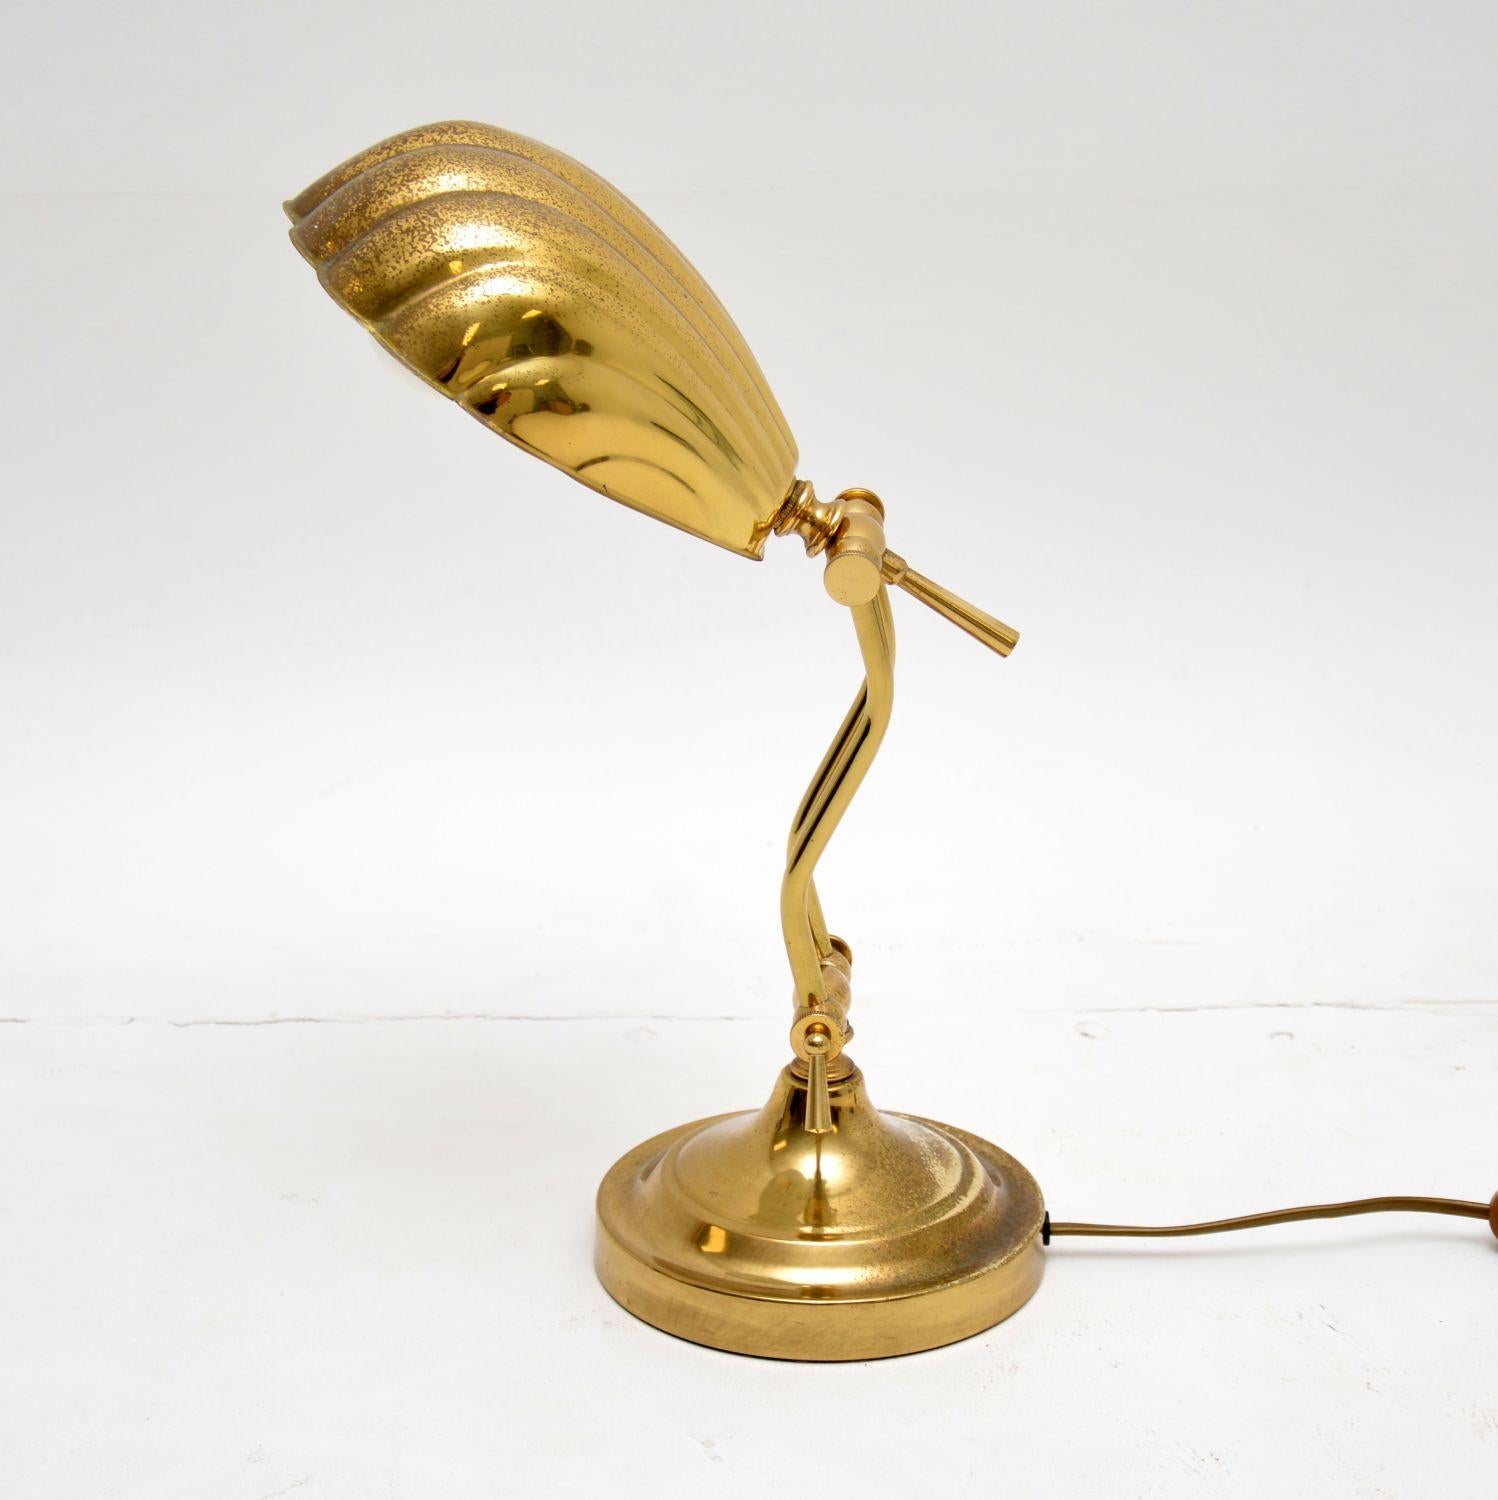 A smart and stylish vintage desk lamp in brass. This dates from the 1970s-1980s, it’s in good vintage condition. The brass has some light surface wear and tarnishing, it has acquired a beautiful patina. It is in good working order.

Measures: